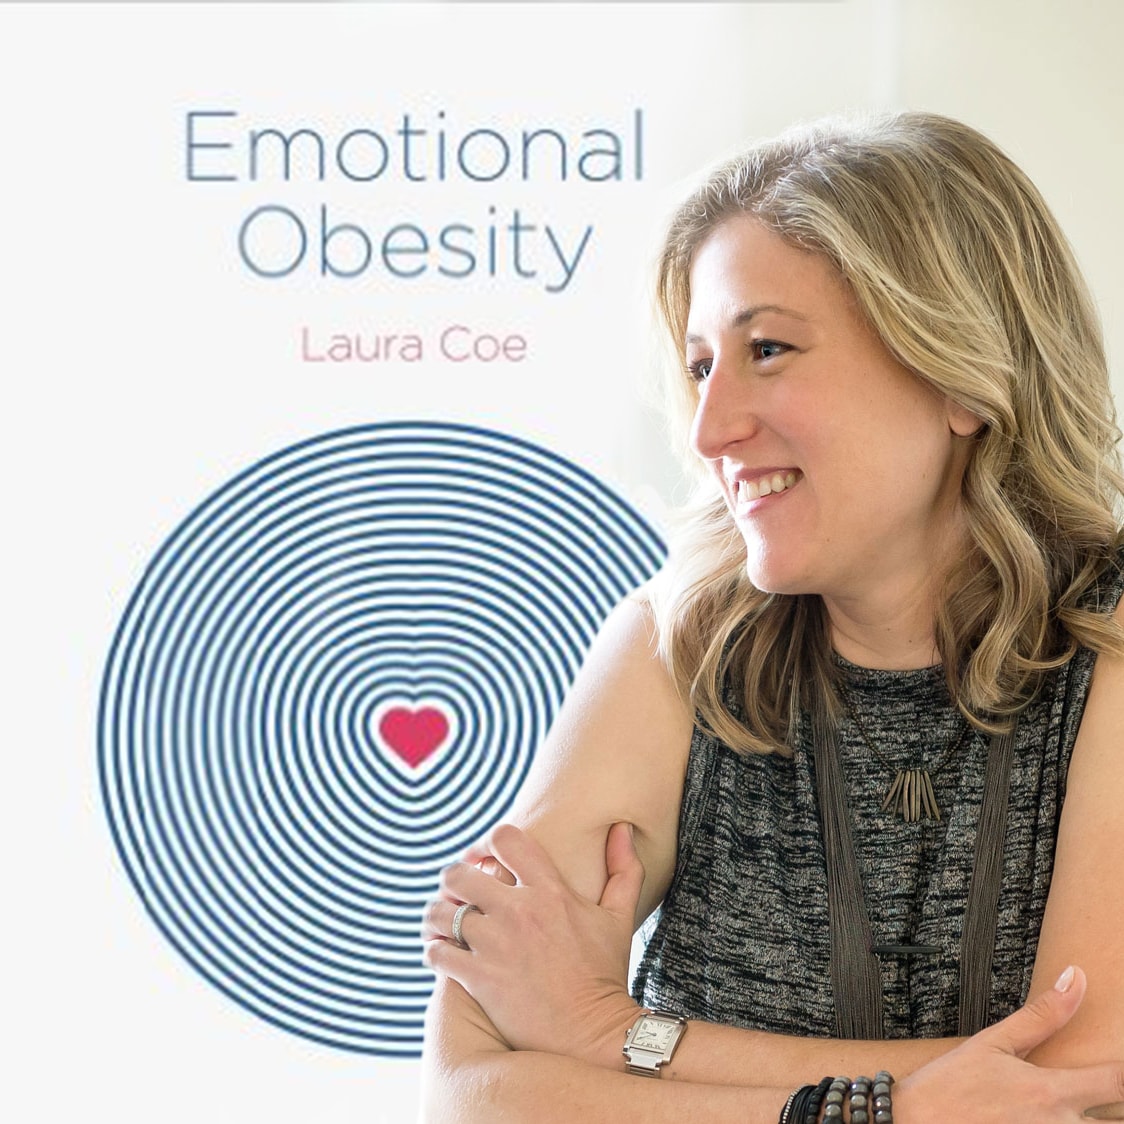 Episode 7: Journaling To Shed Emotional Weight With Laura Coe